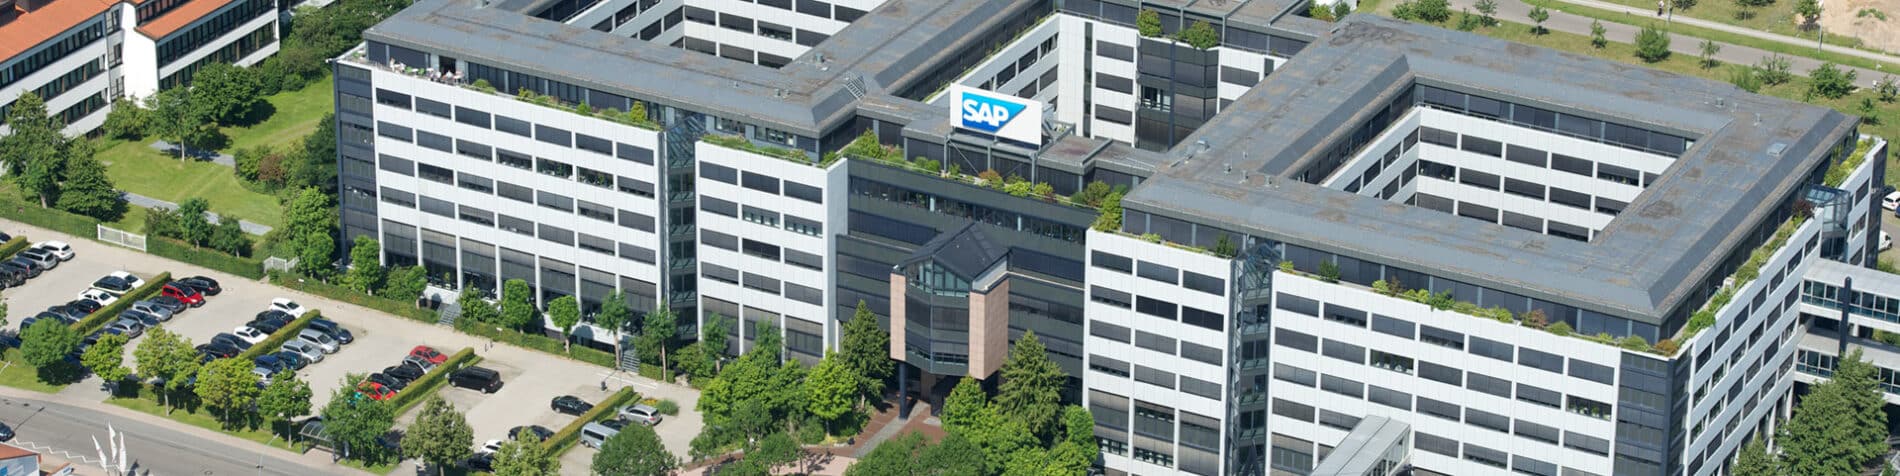 SAP to Release Second Quarter 2023 Results